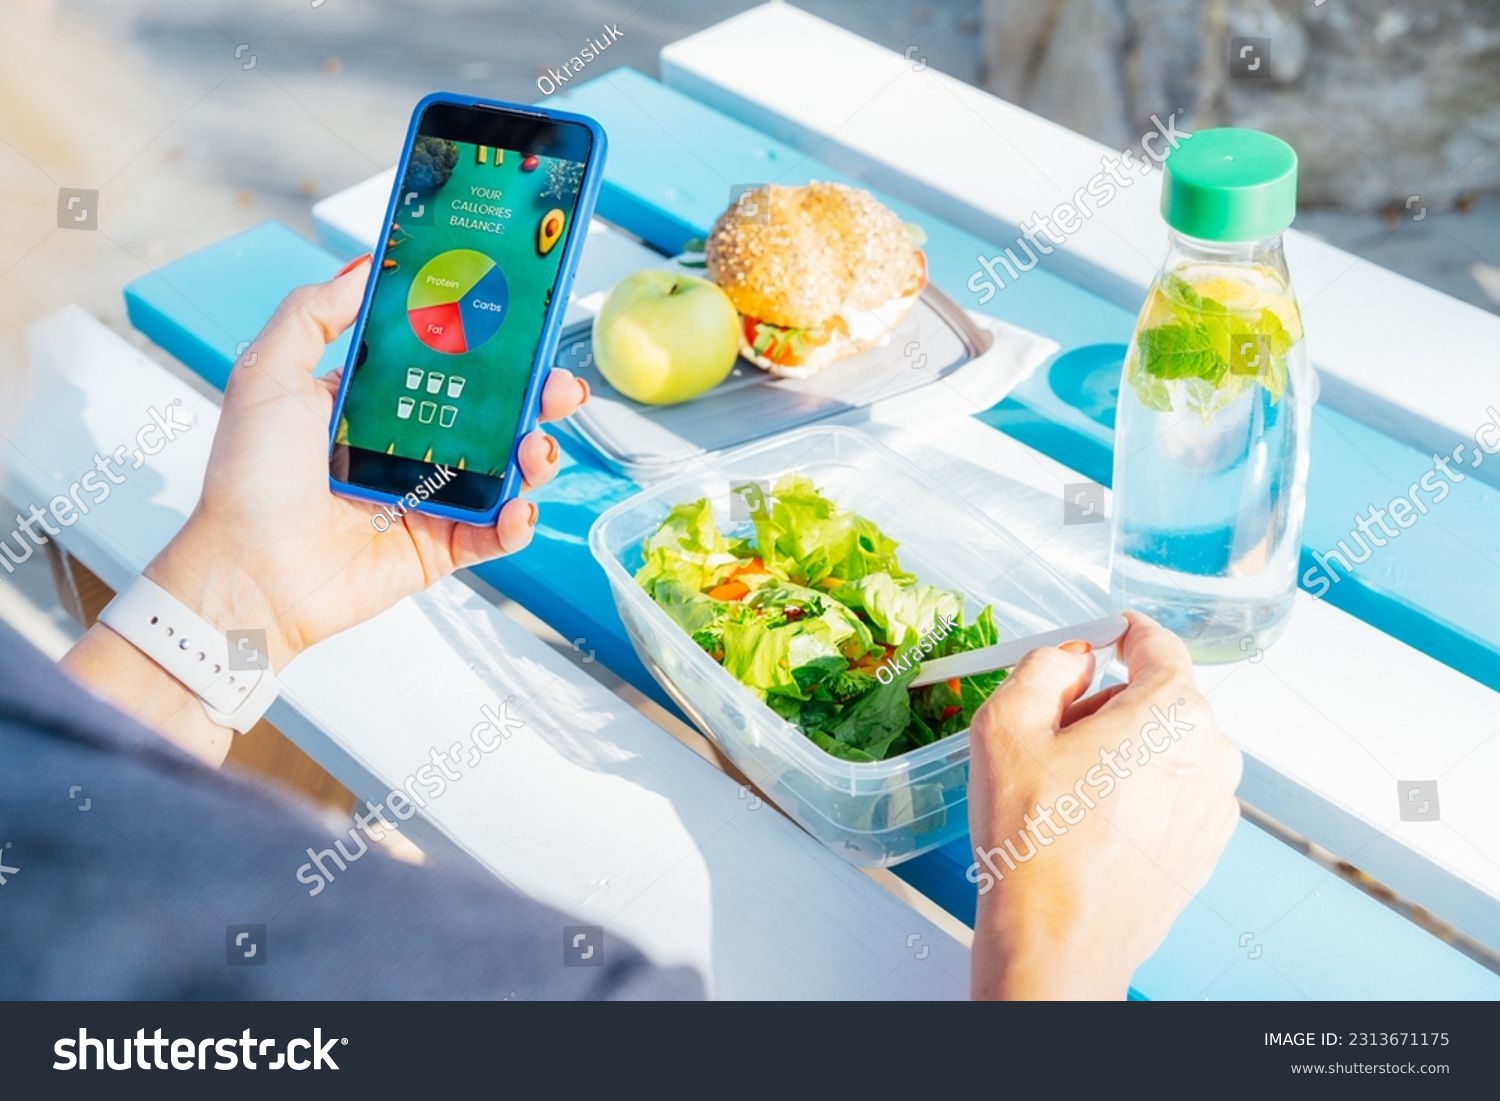 Close up woman using meal tracker app on phone while eating salad at picnic table in the park on a break. Healthy balanced diet lunch box. Healthy diet plan for weight loss. Selective focus #2313671175